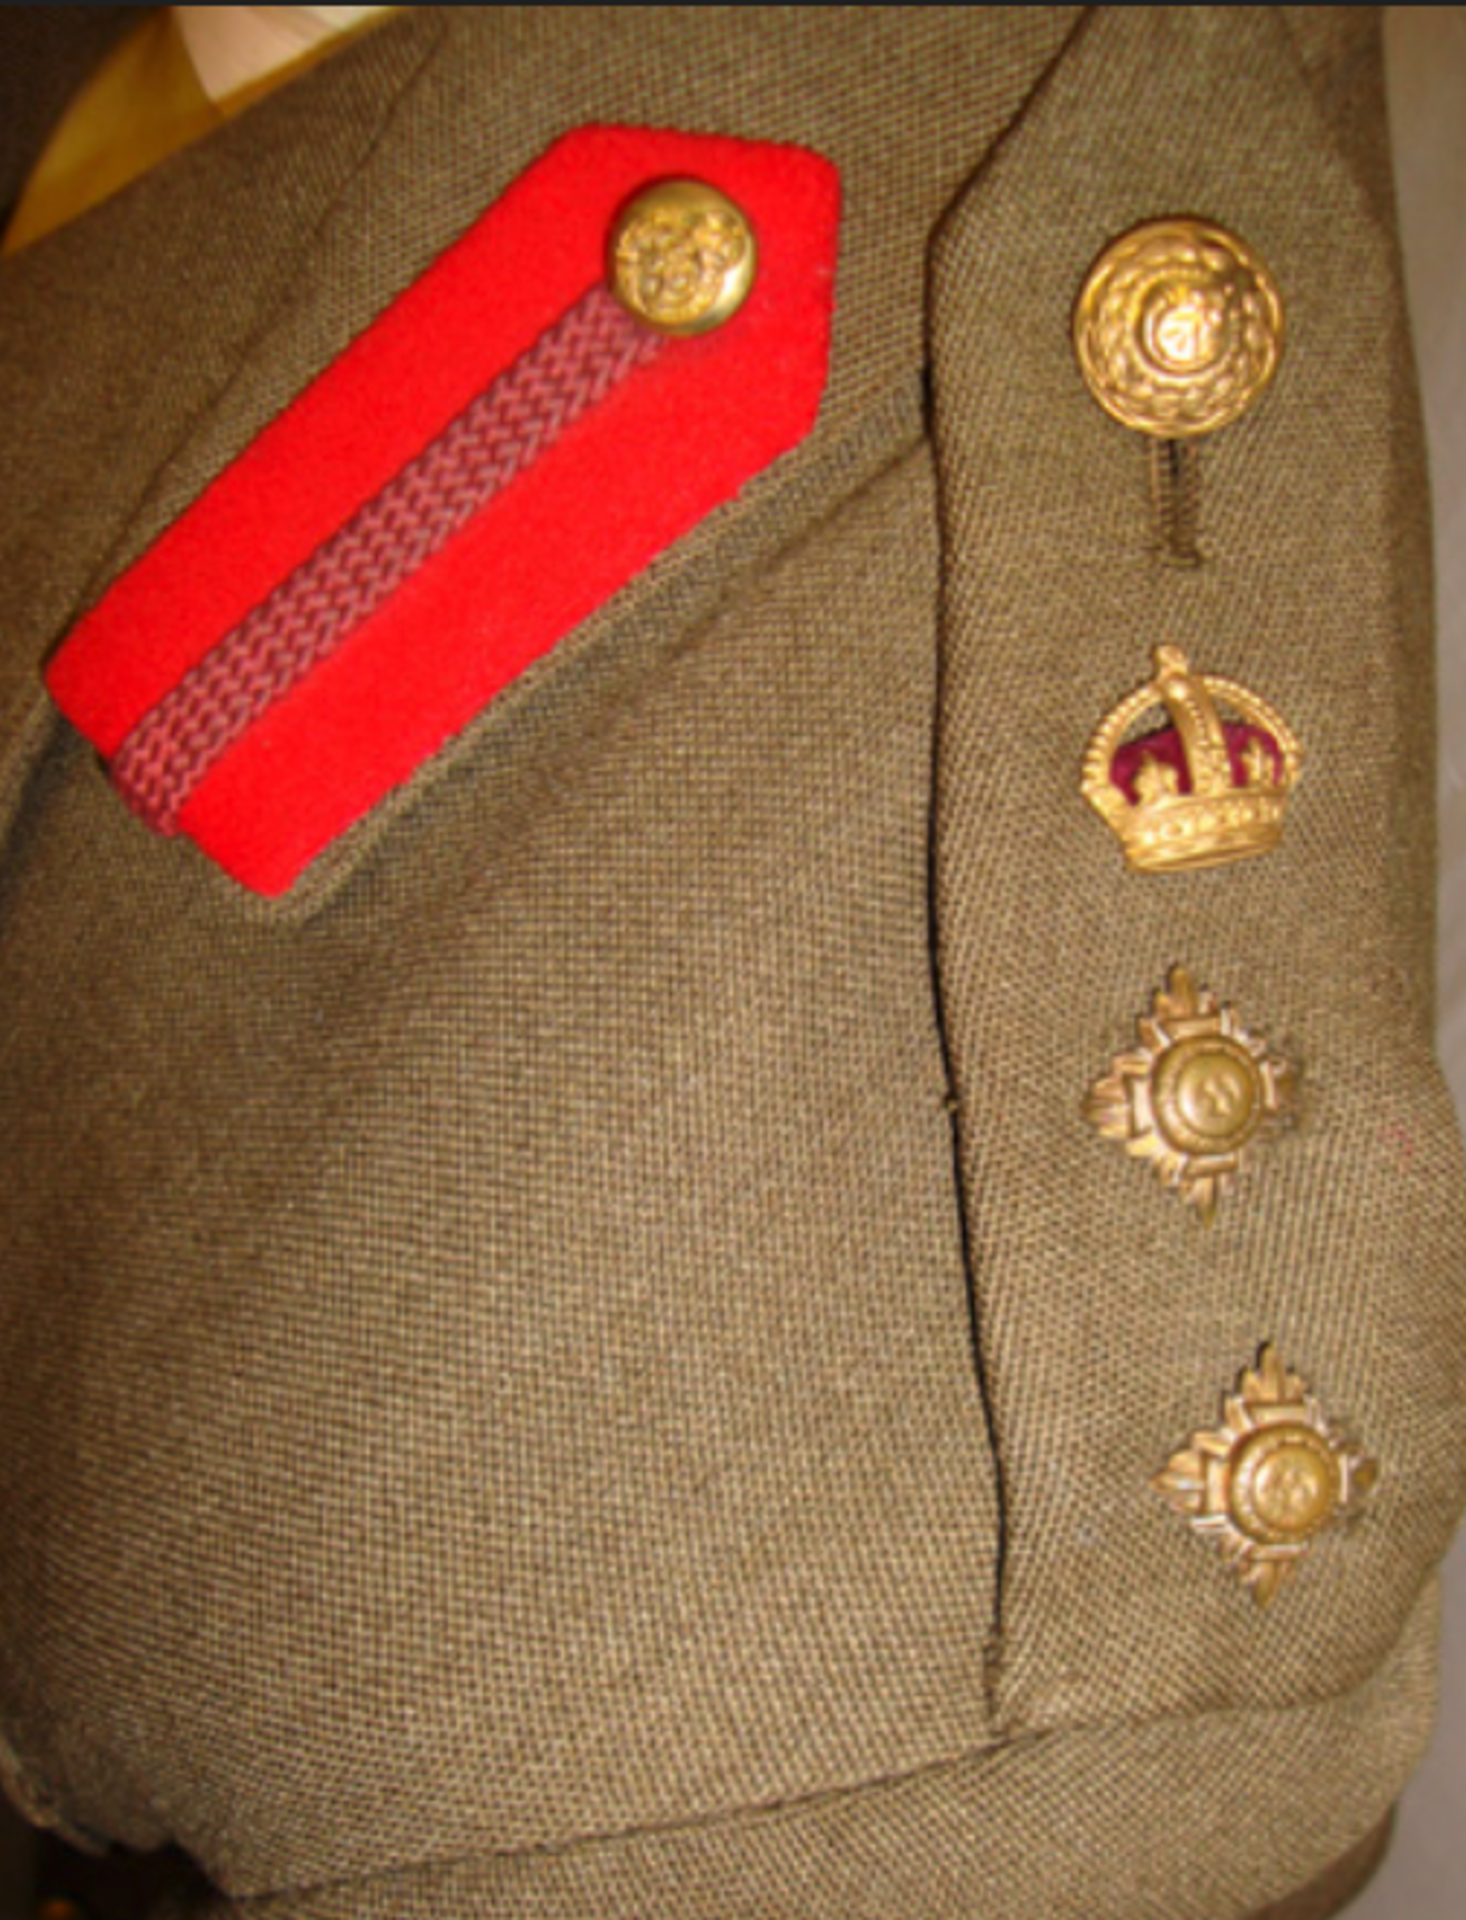 WW2 Attributed Ox & Bucks Officers SD Jacket & Belt - Image 2 of 3